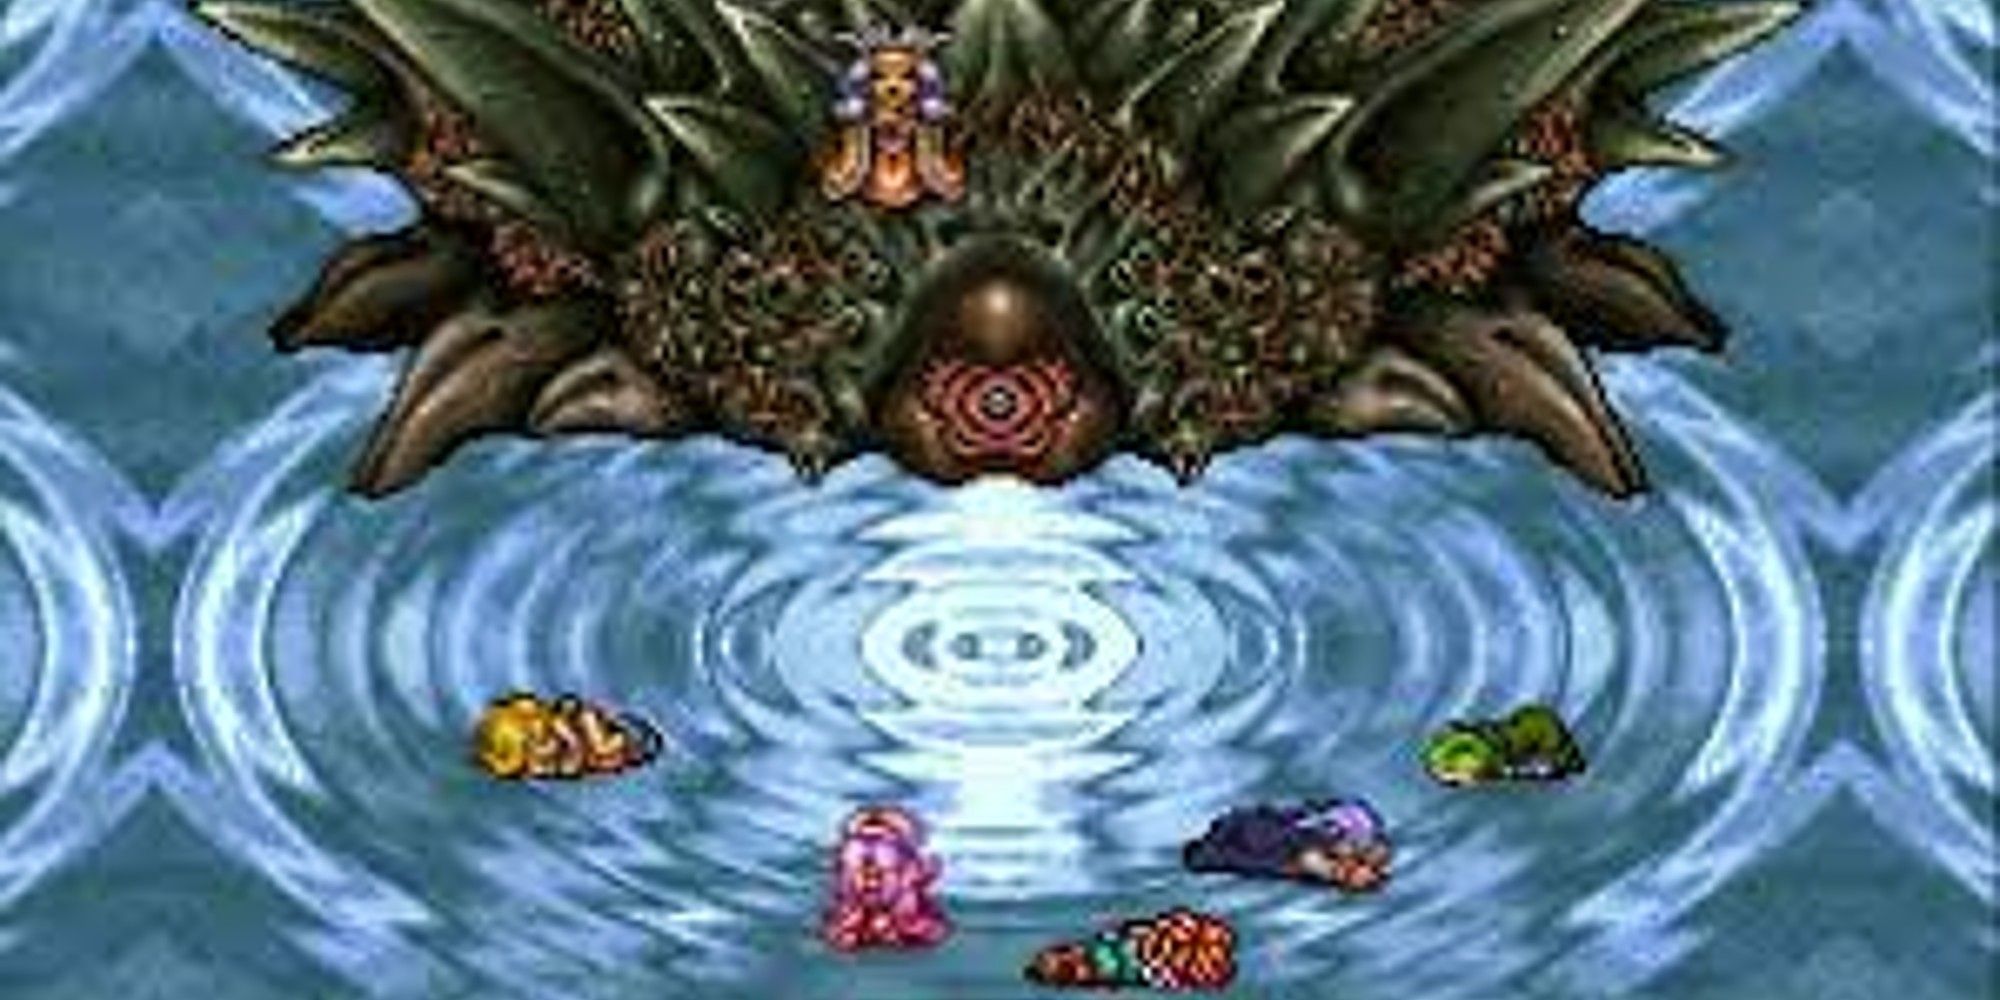 Chrono-Trigger- the party fails to stop Lavos at first